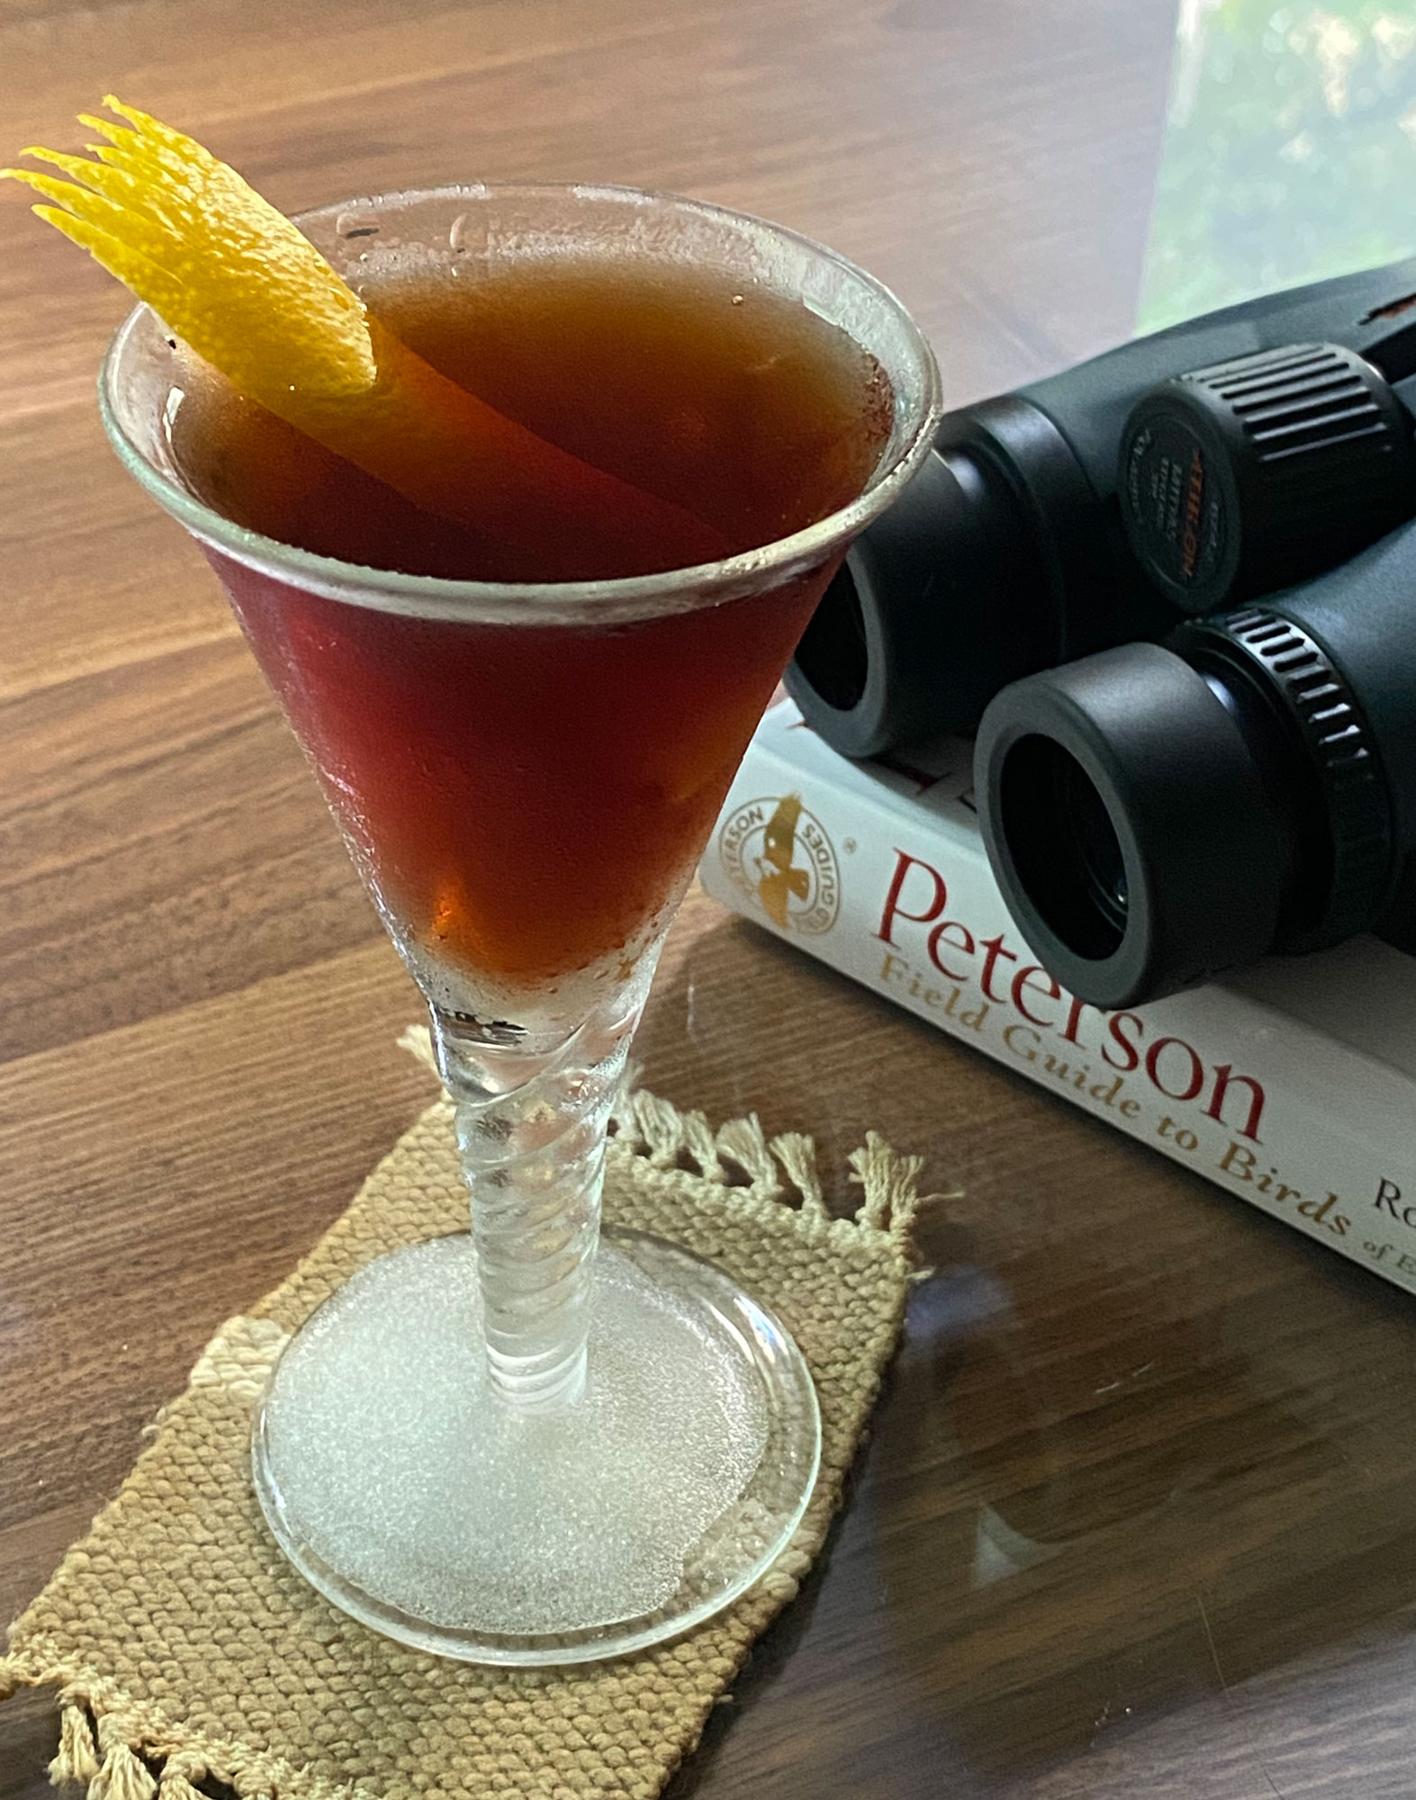 An example of the Lower Heights, the mixed drink (drink) featuring Cardamaro Vino Amaro, Pasubio Vino Amaro, Angostura bitters, and orange twist; photo by Martin Doudoroff